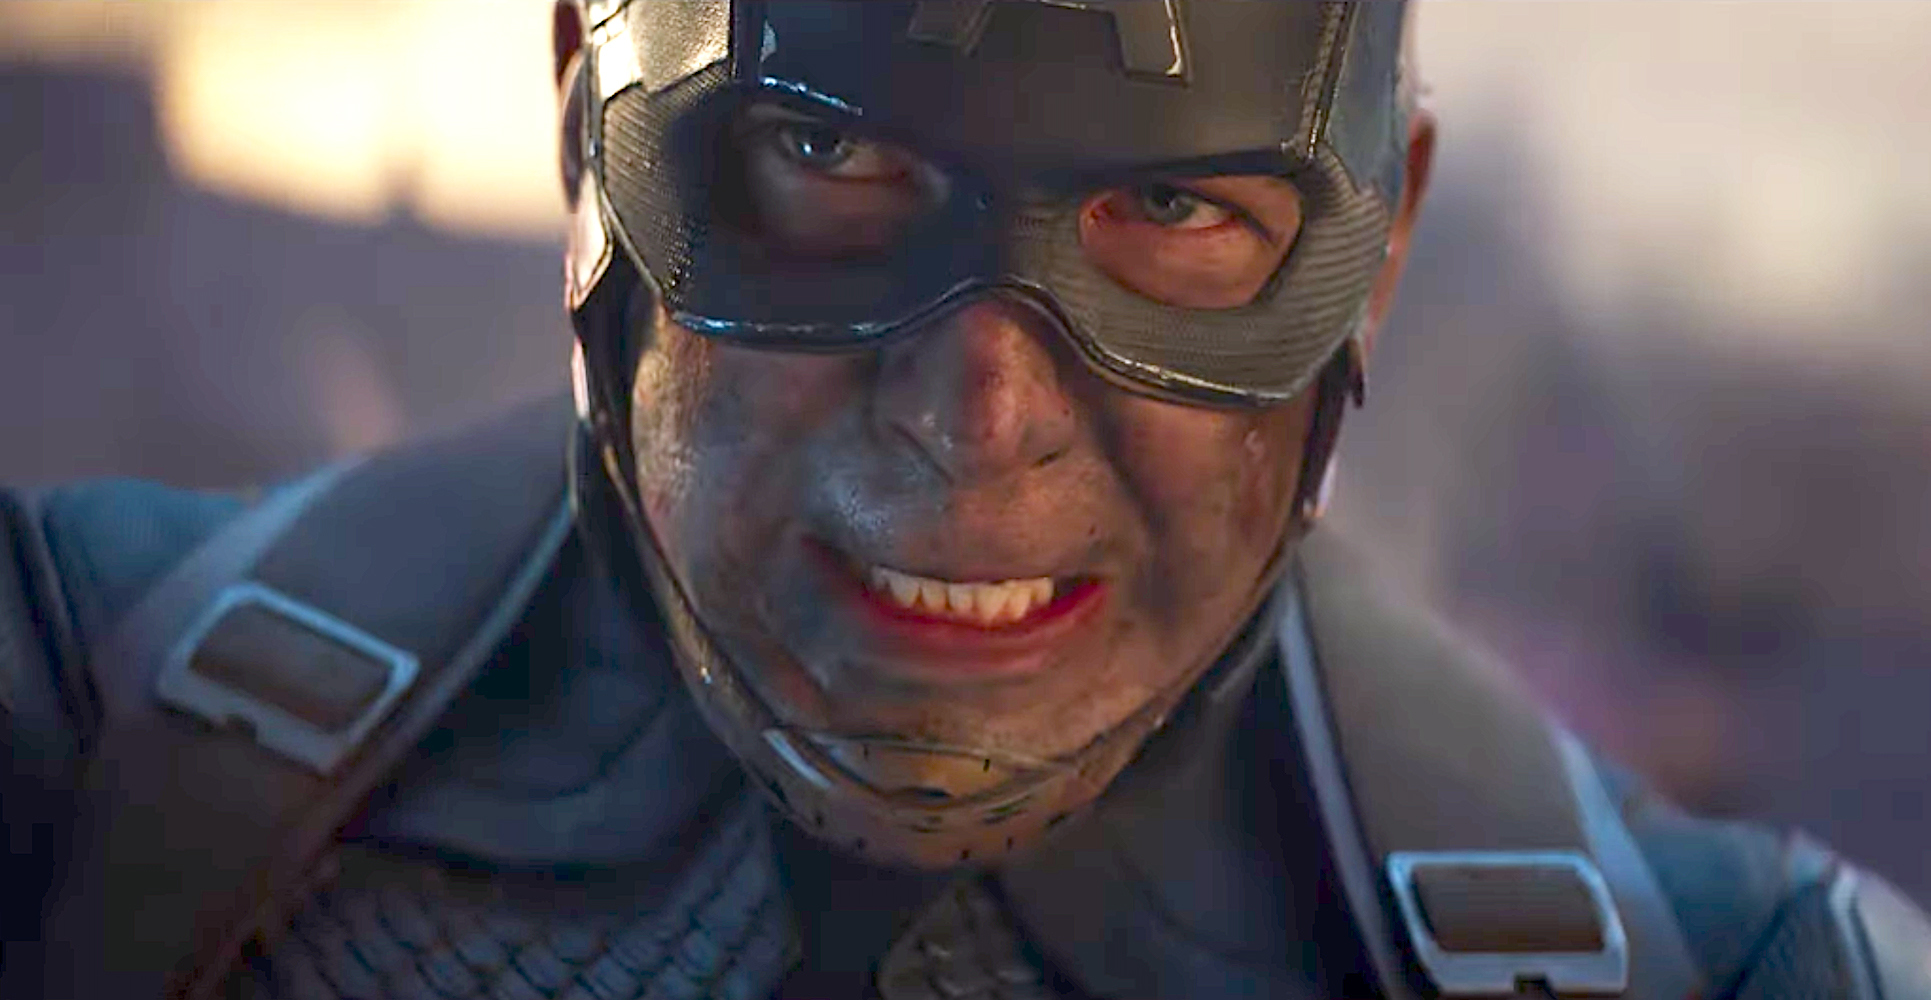 This mind-blowing ‘Avengers: Endgame’ leak will ruin the film for you even if it’s not real